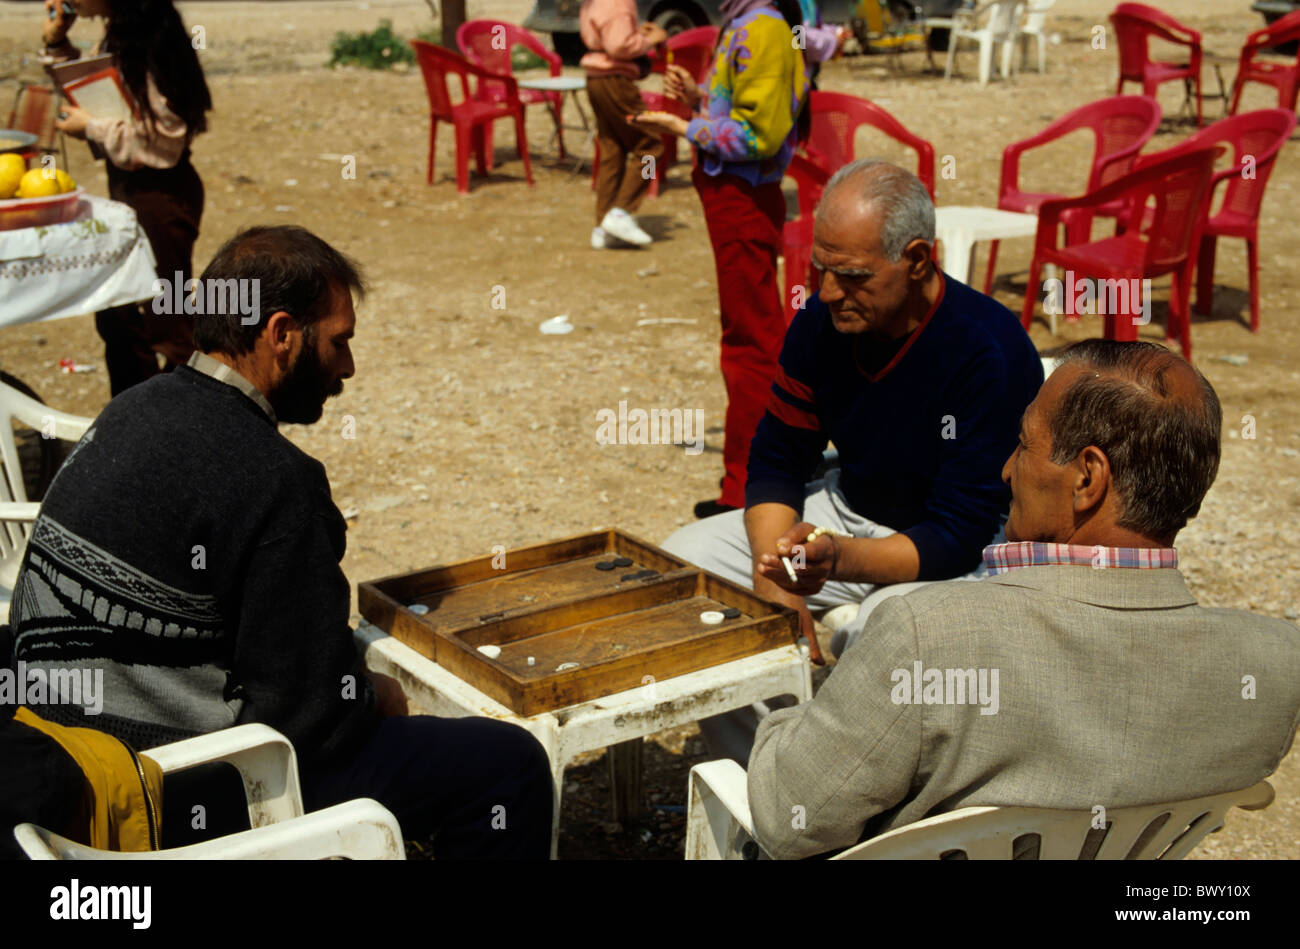 Men playing a board game in Martyr's Place, Beirut, Lebanon. Stock Photo